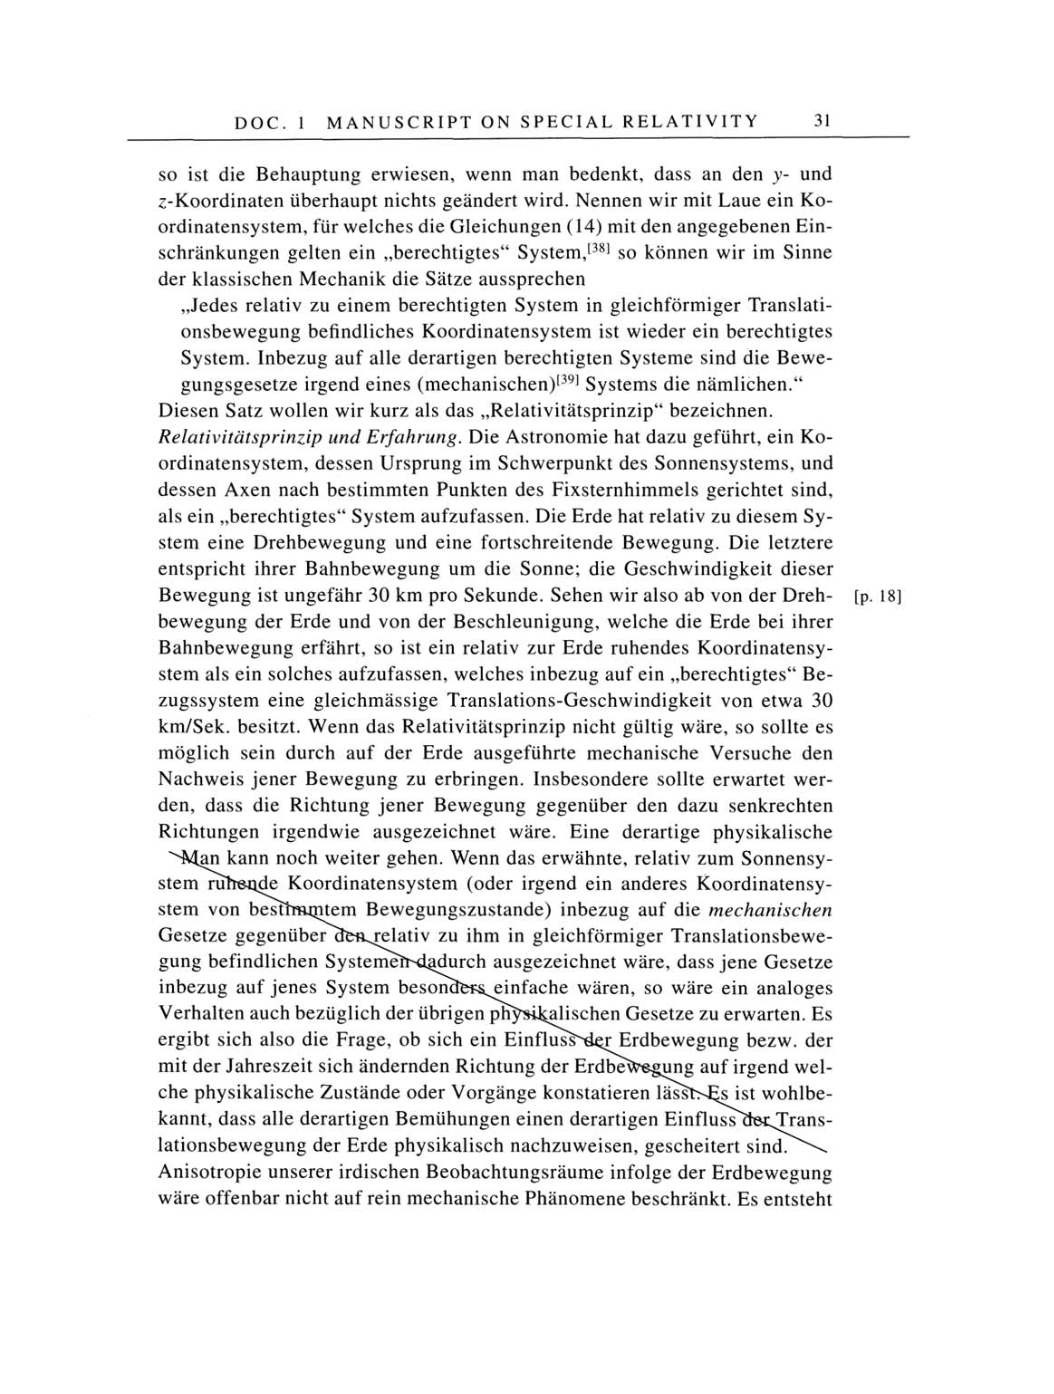 Volume 4: The Swiss Years: Writings 1912-1914 page 31